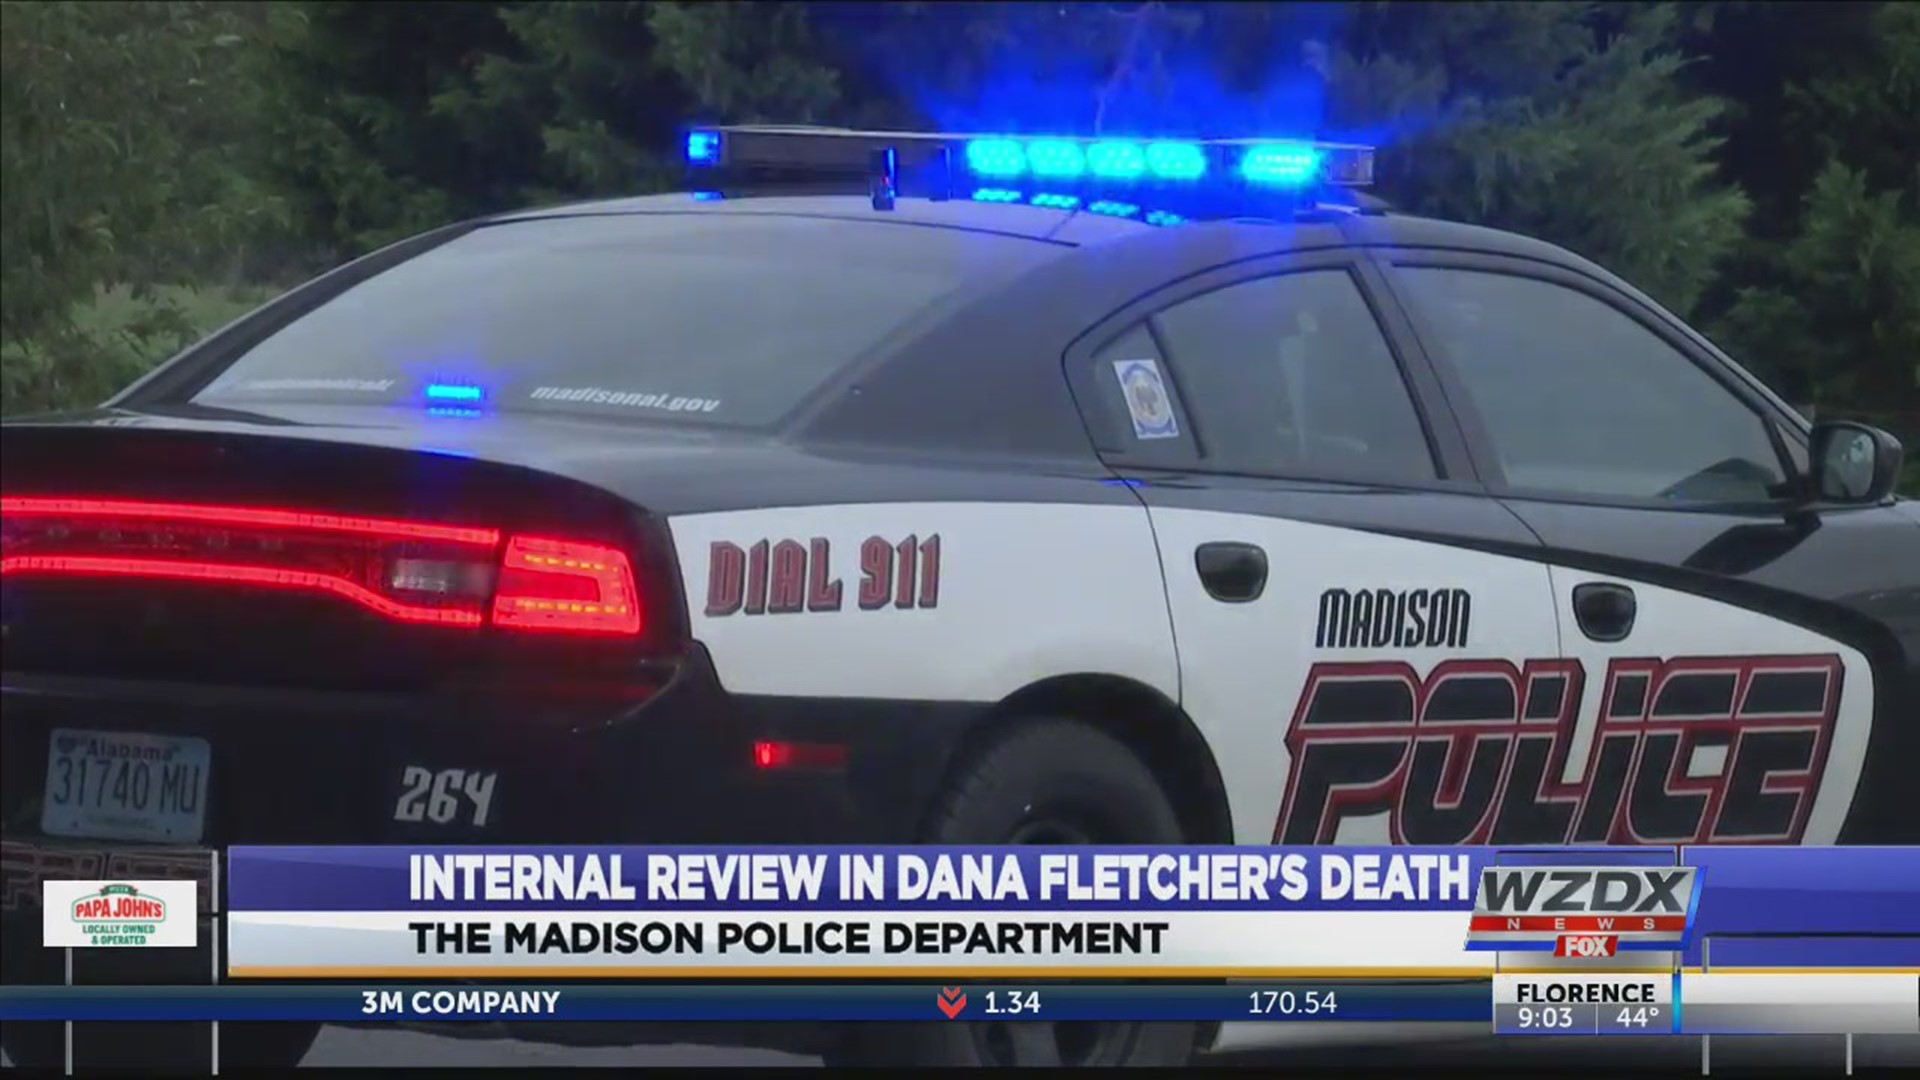 The Madison Police Department will conduct an internal review into the shooting death of Dana Fletcher.